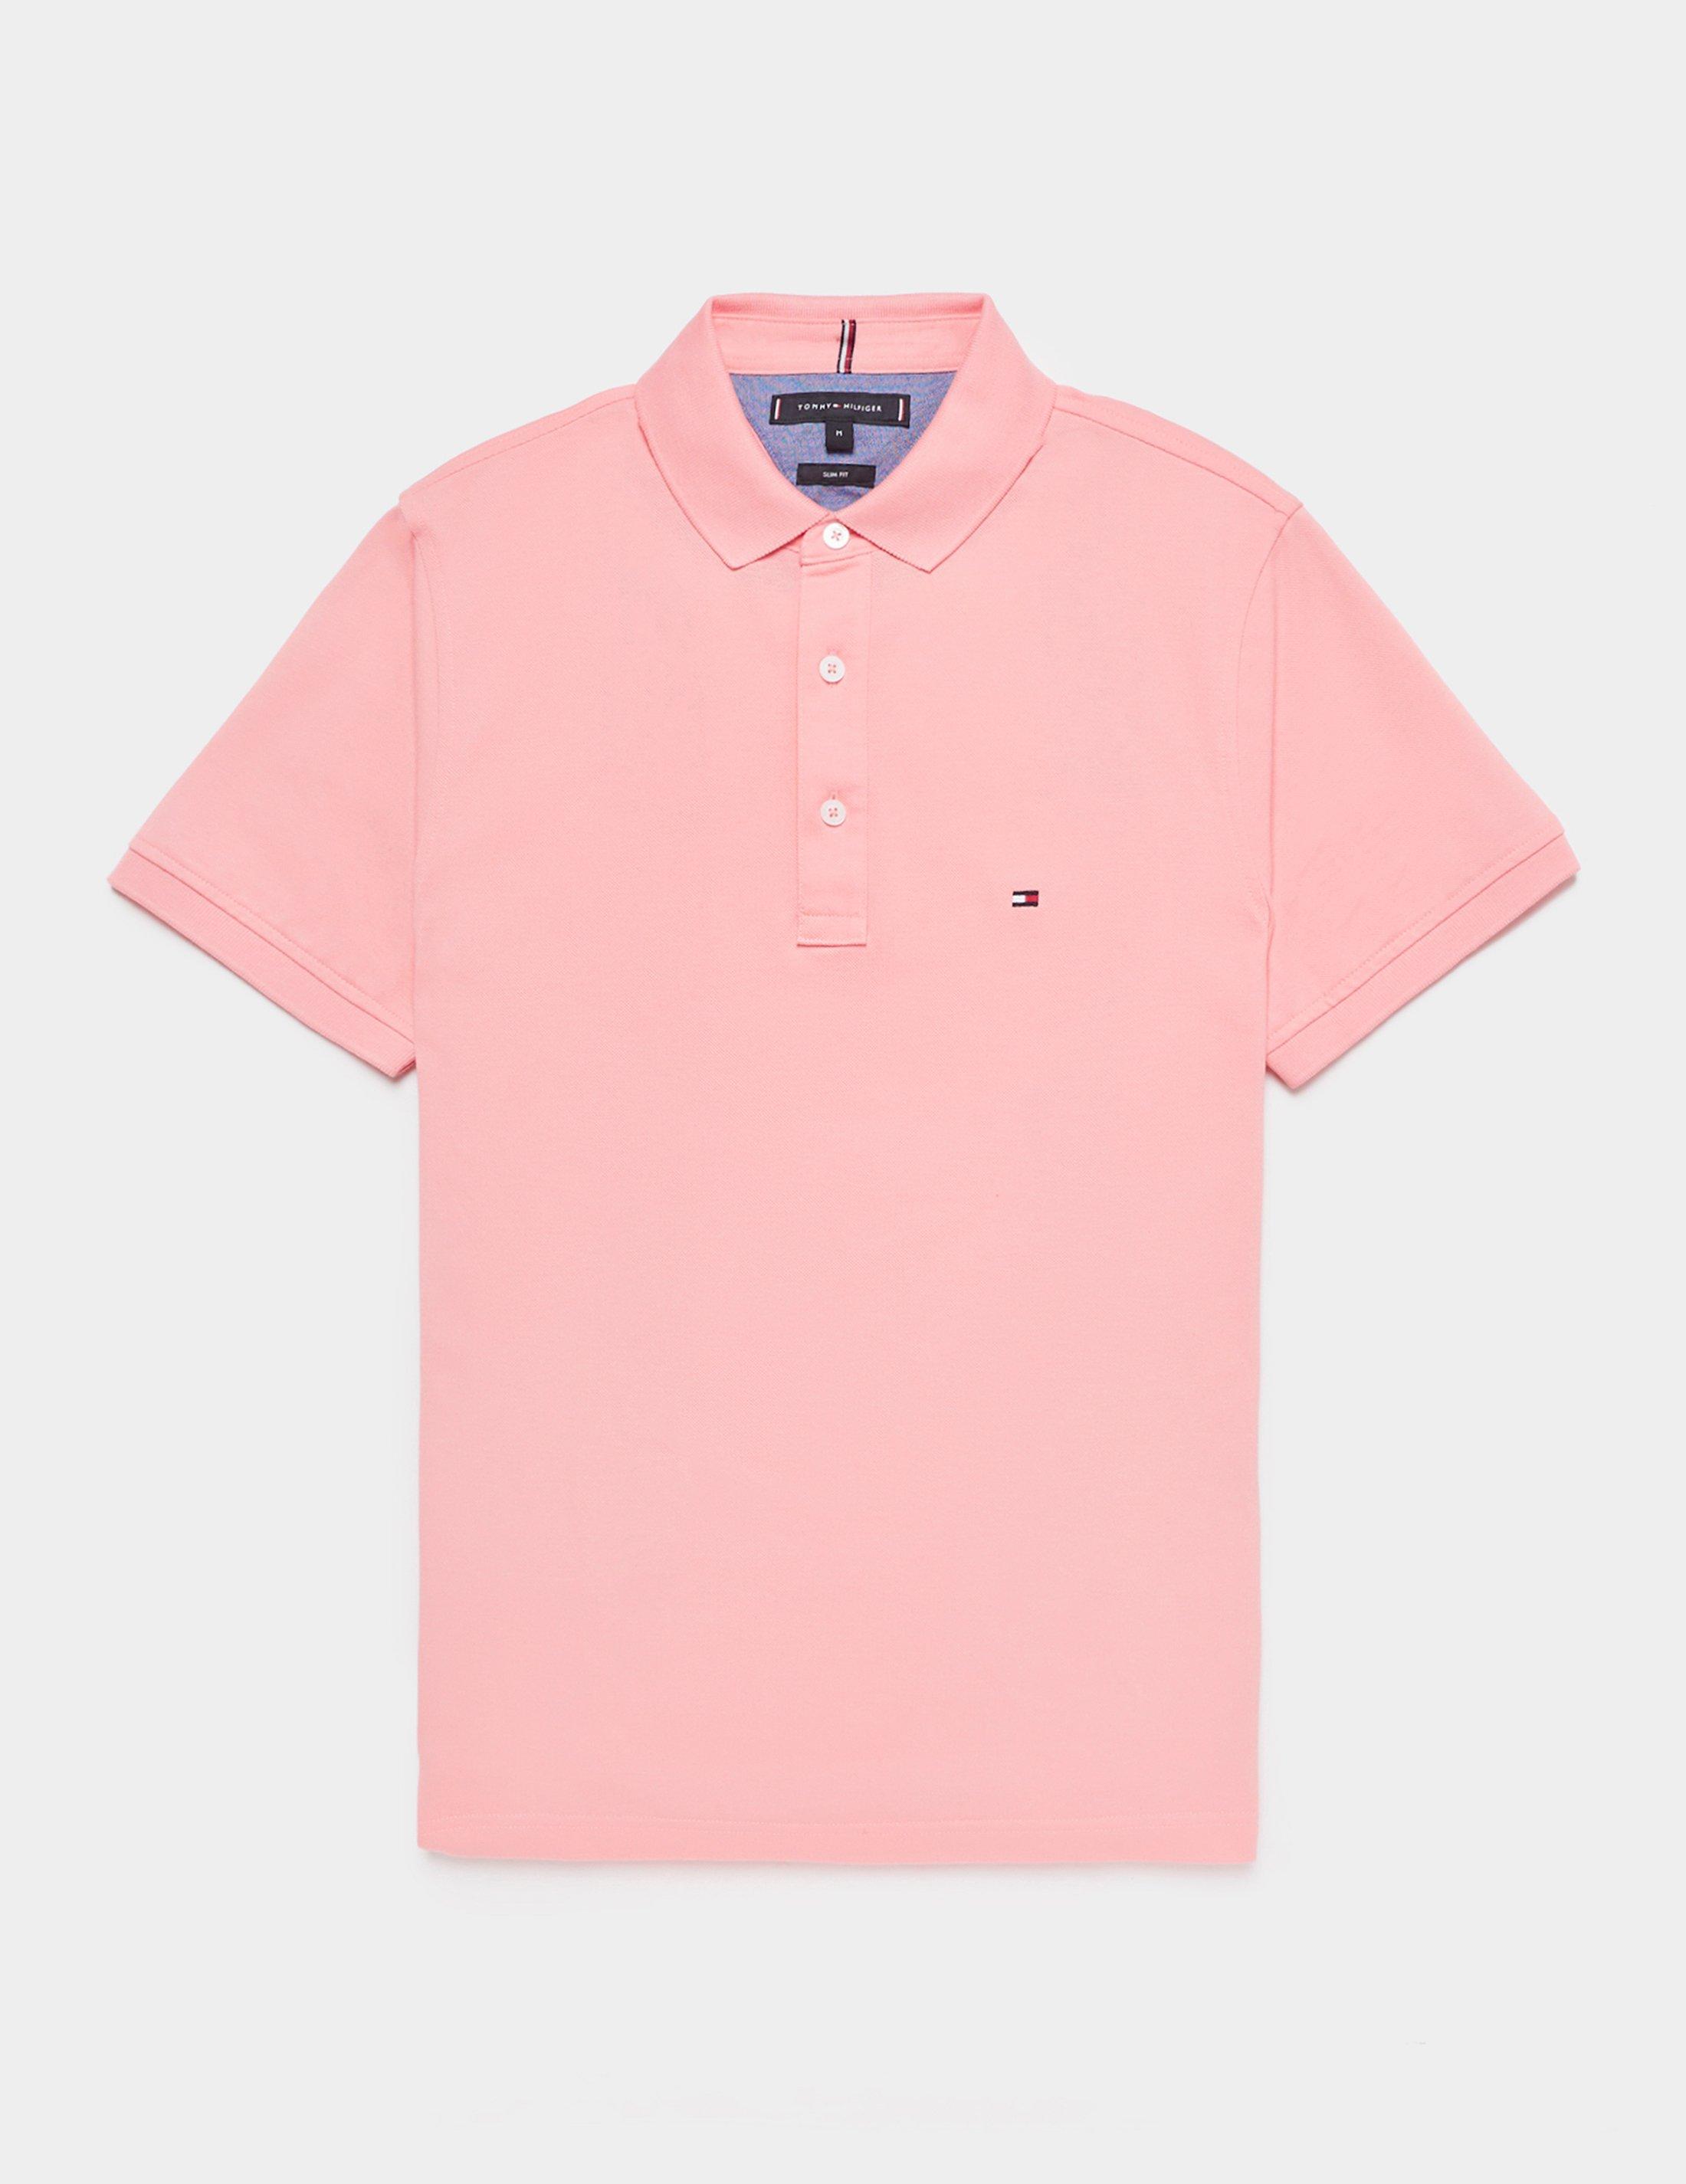 tommy hilfiger pink polo shirt